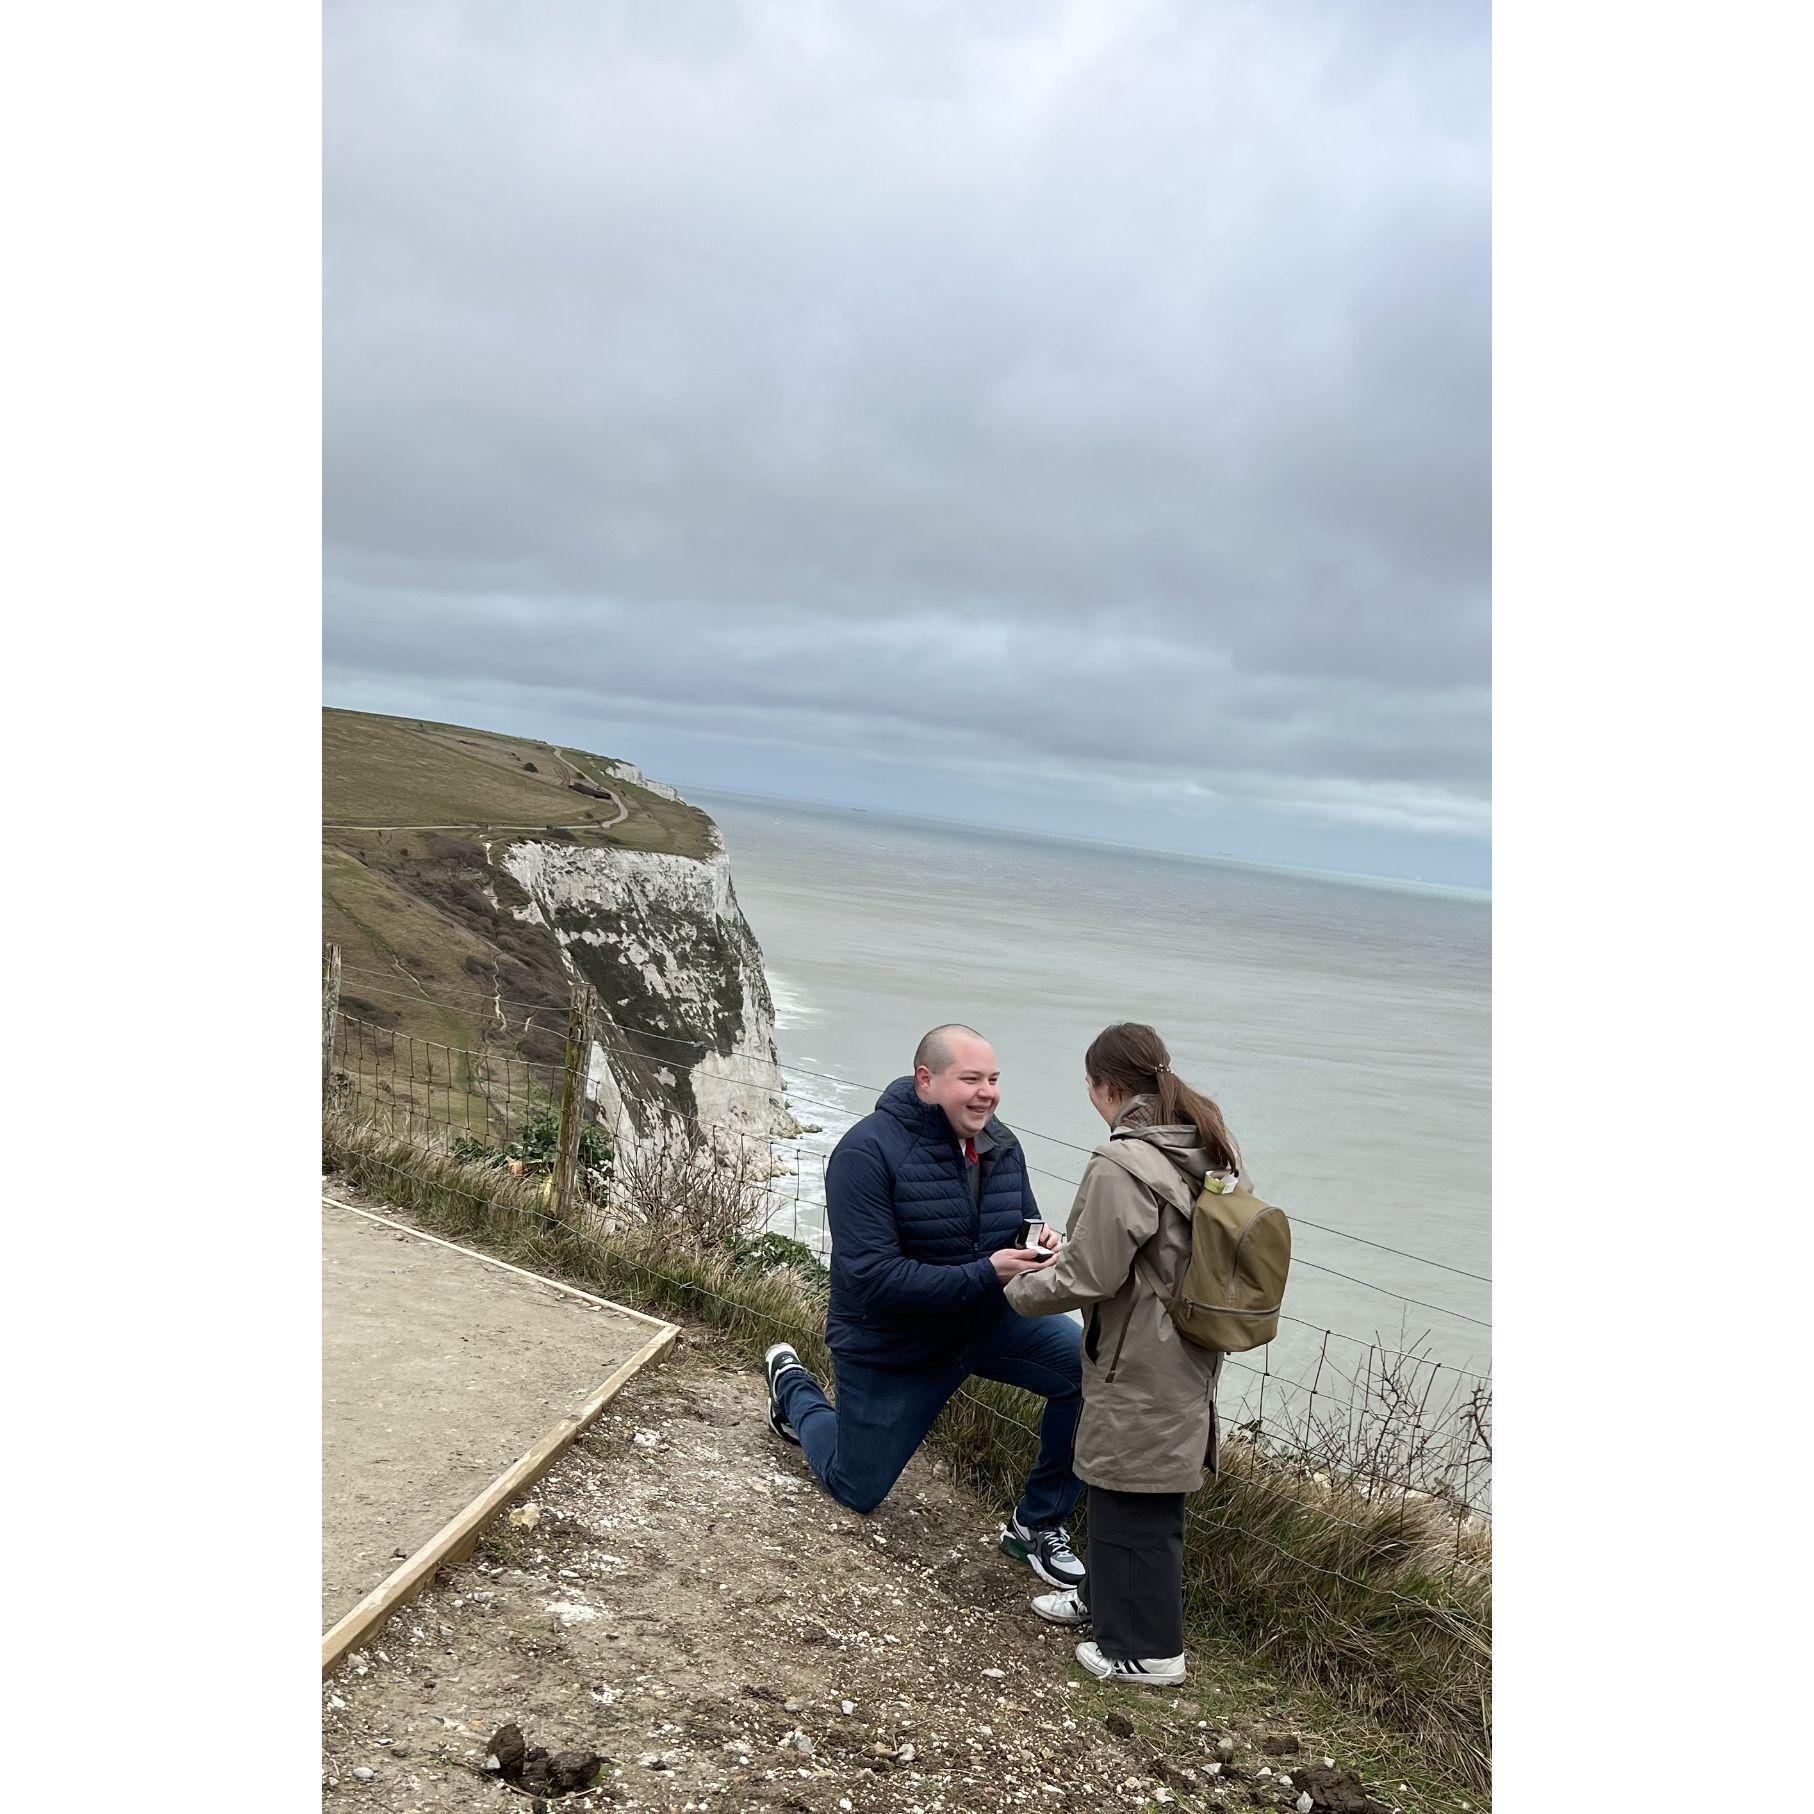 Where Matt proposed. This is in front of the White Cliffs of Dover in England. You wouldn't know it, but we had somewhat hiked up a very steep (and muddy) path to get here.